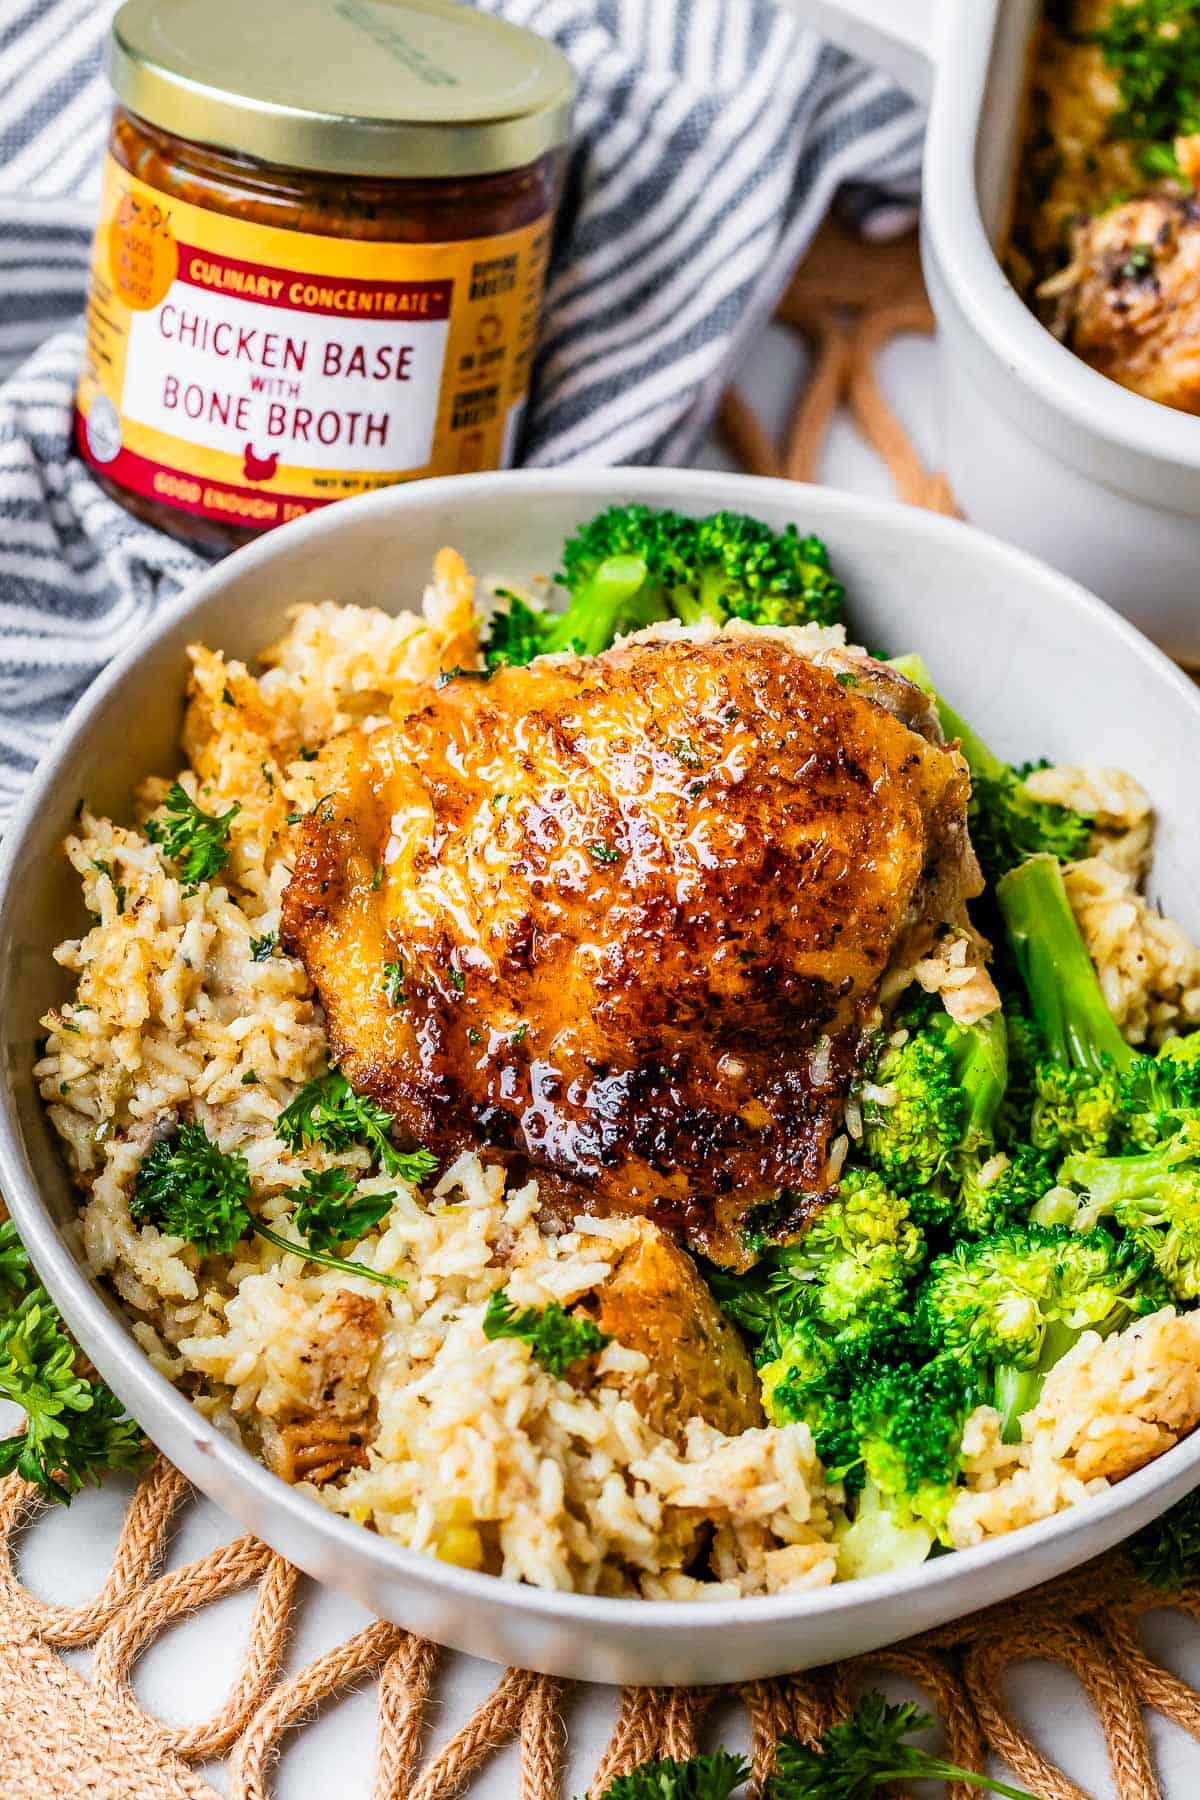 well seared chicken thigh on a bed of creamy rice with broccoli in a bowl.